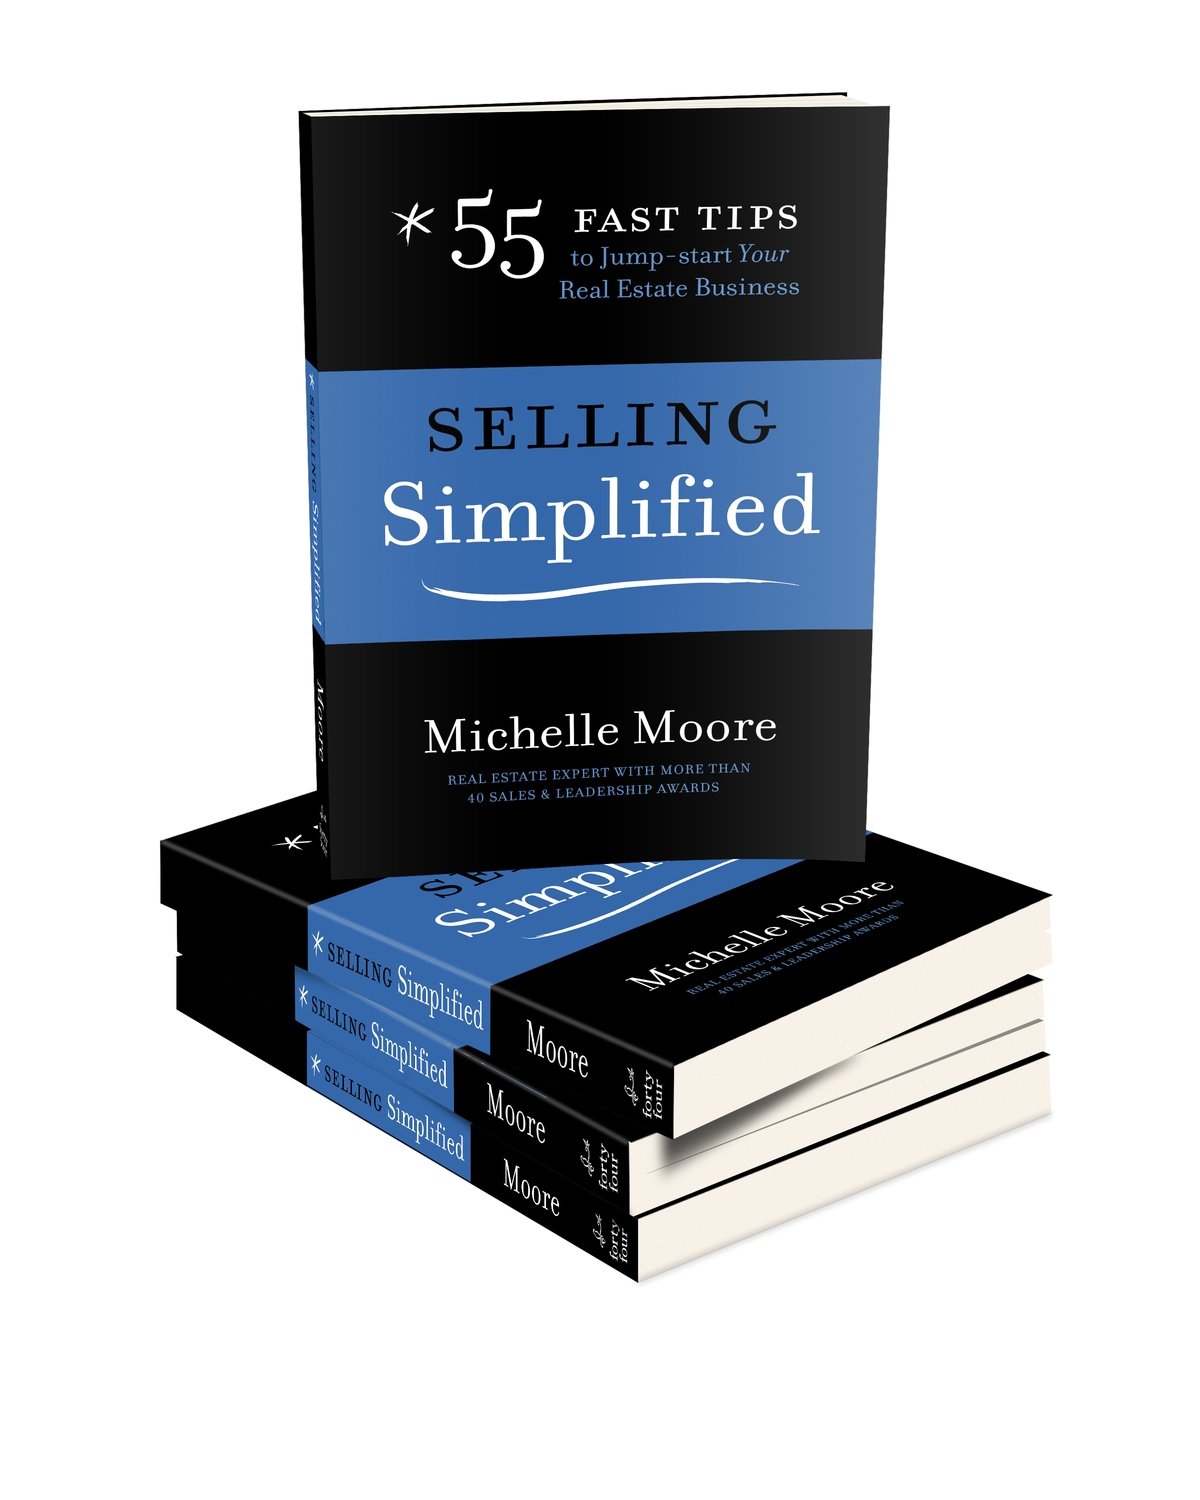 Selling Simplified: 55 Fast Tips to Jump-start Your Real Estate Business